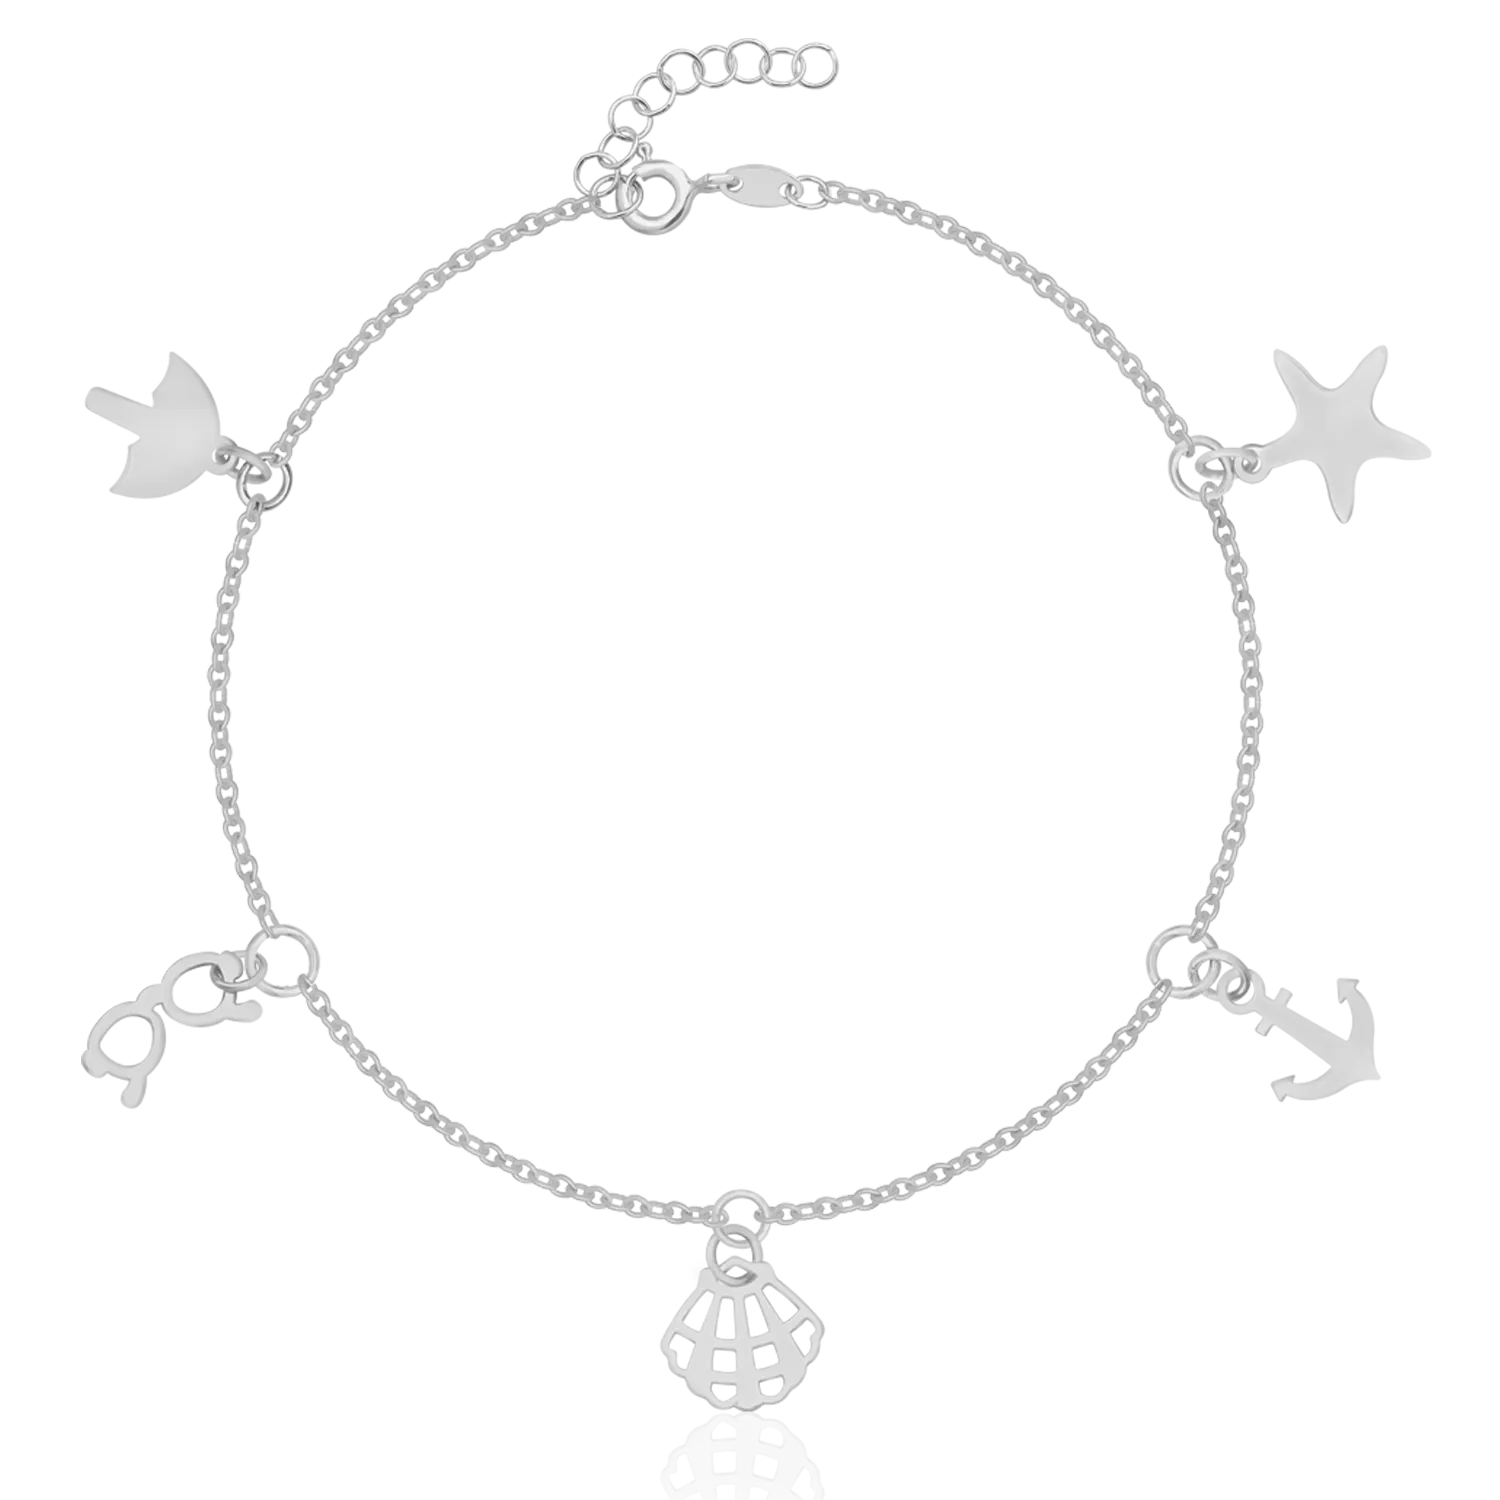 14K white gold ankle bracelet with charms